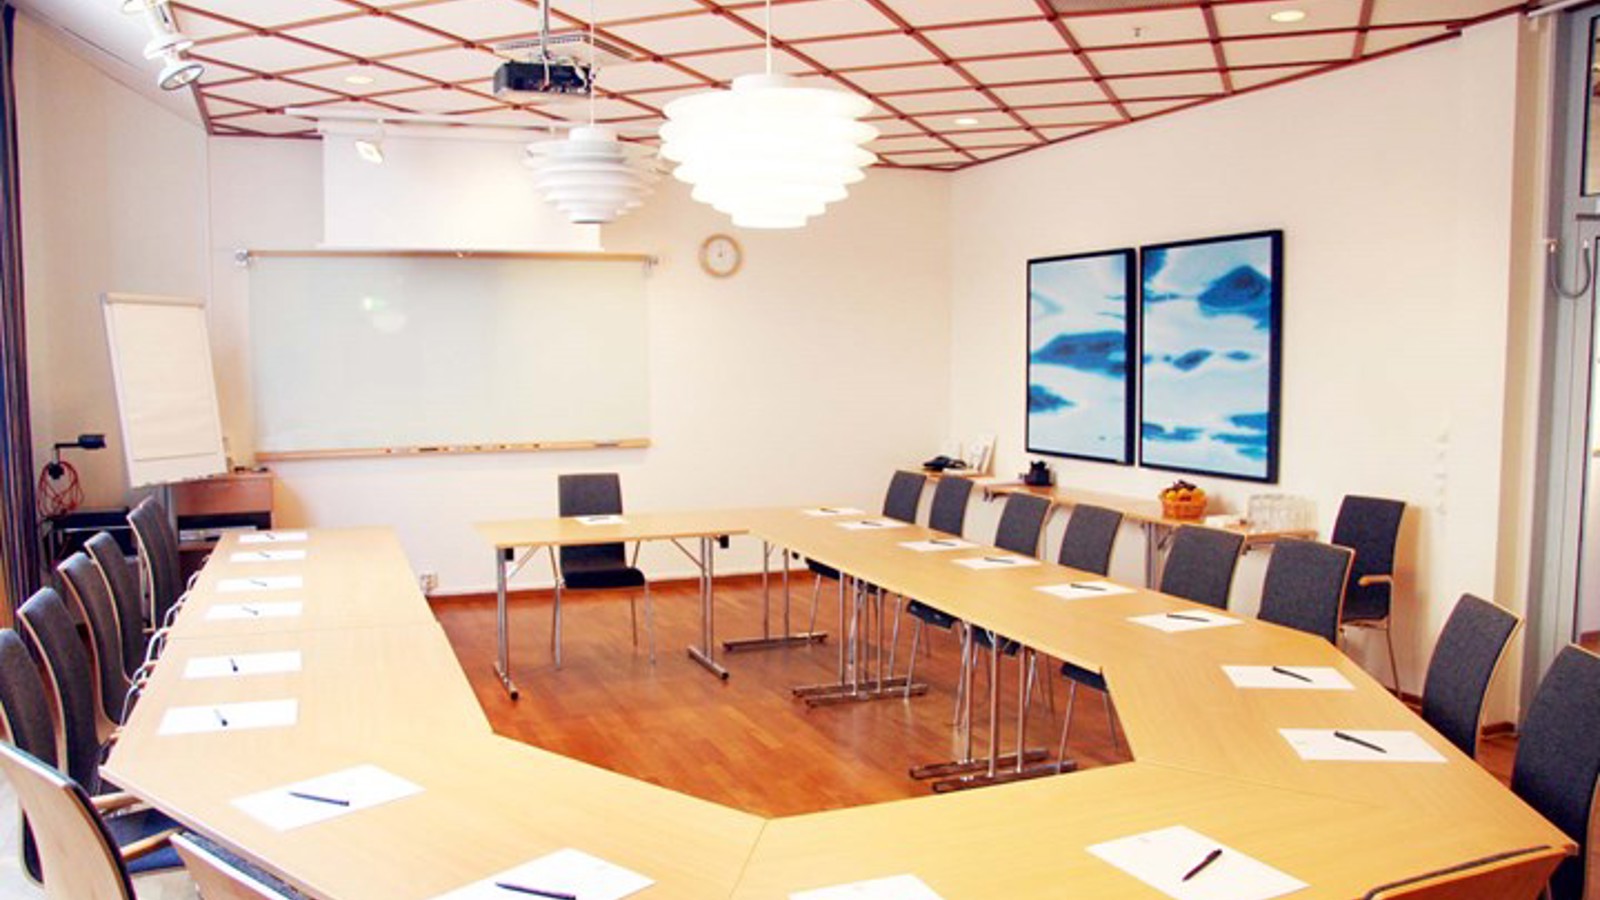 Conference room with u-shaped seating, wooden details and white walls